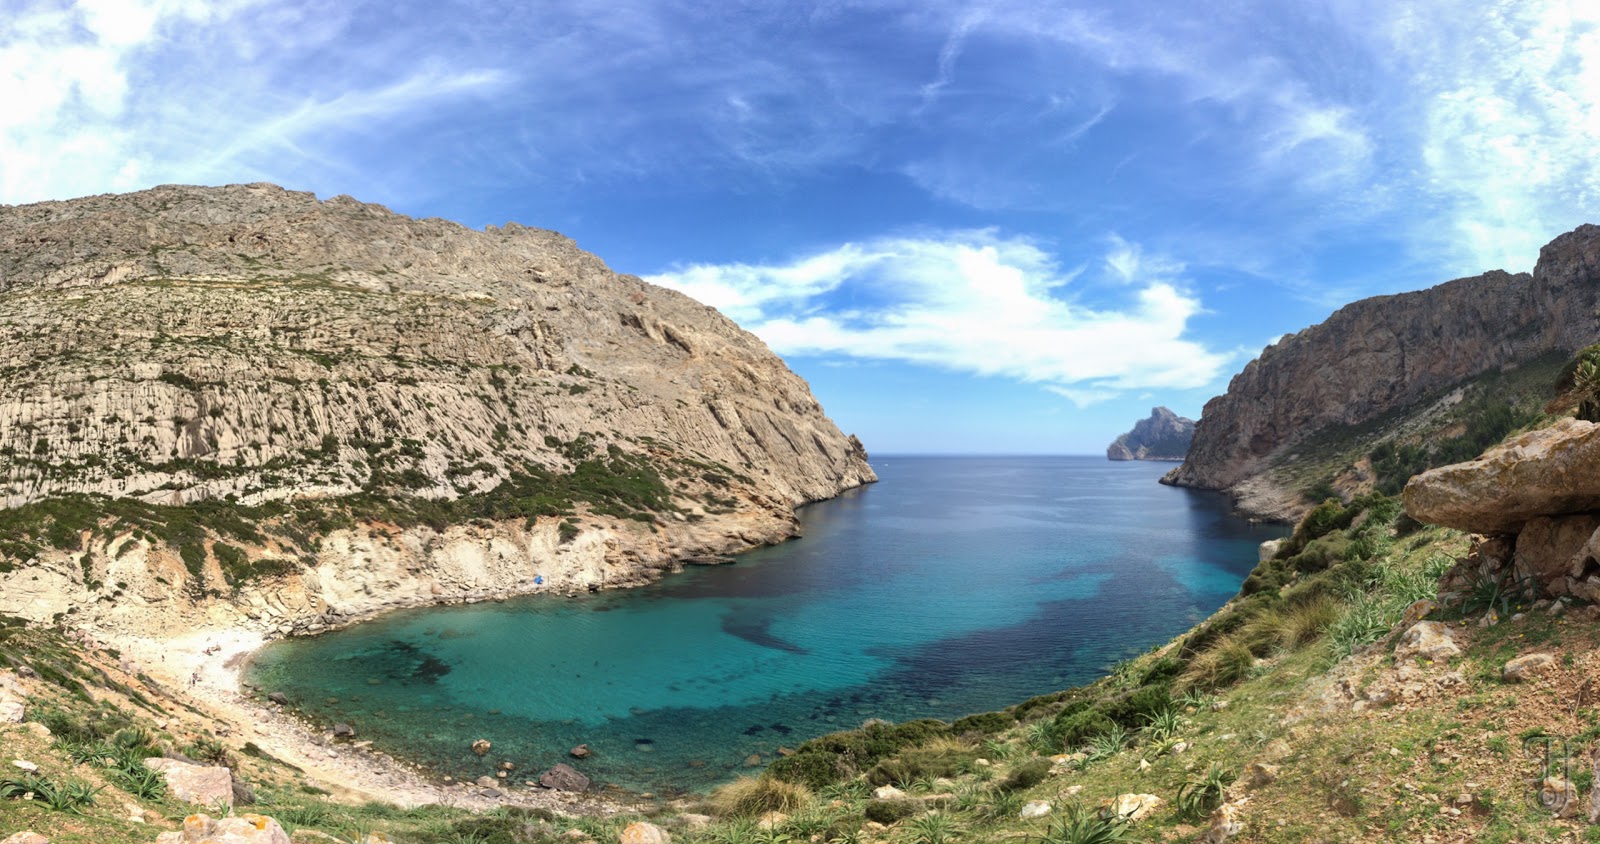 Photo of Cala Boquer backed by cliffs